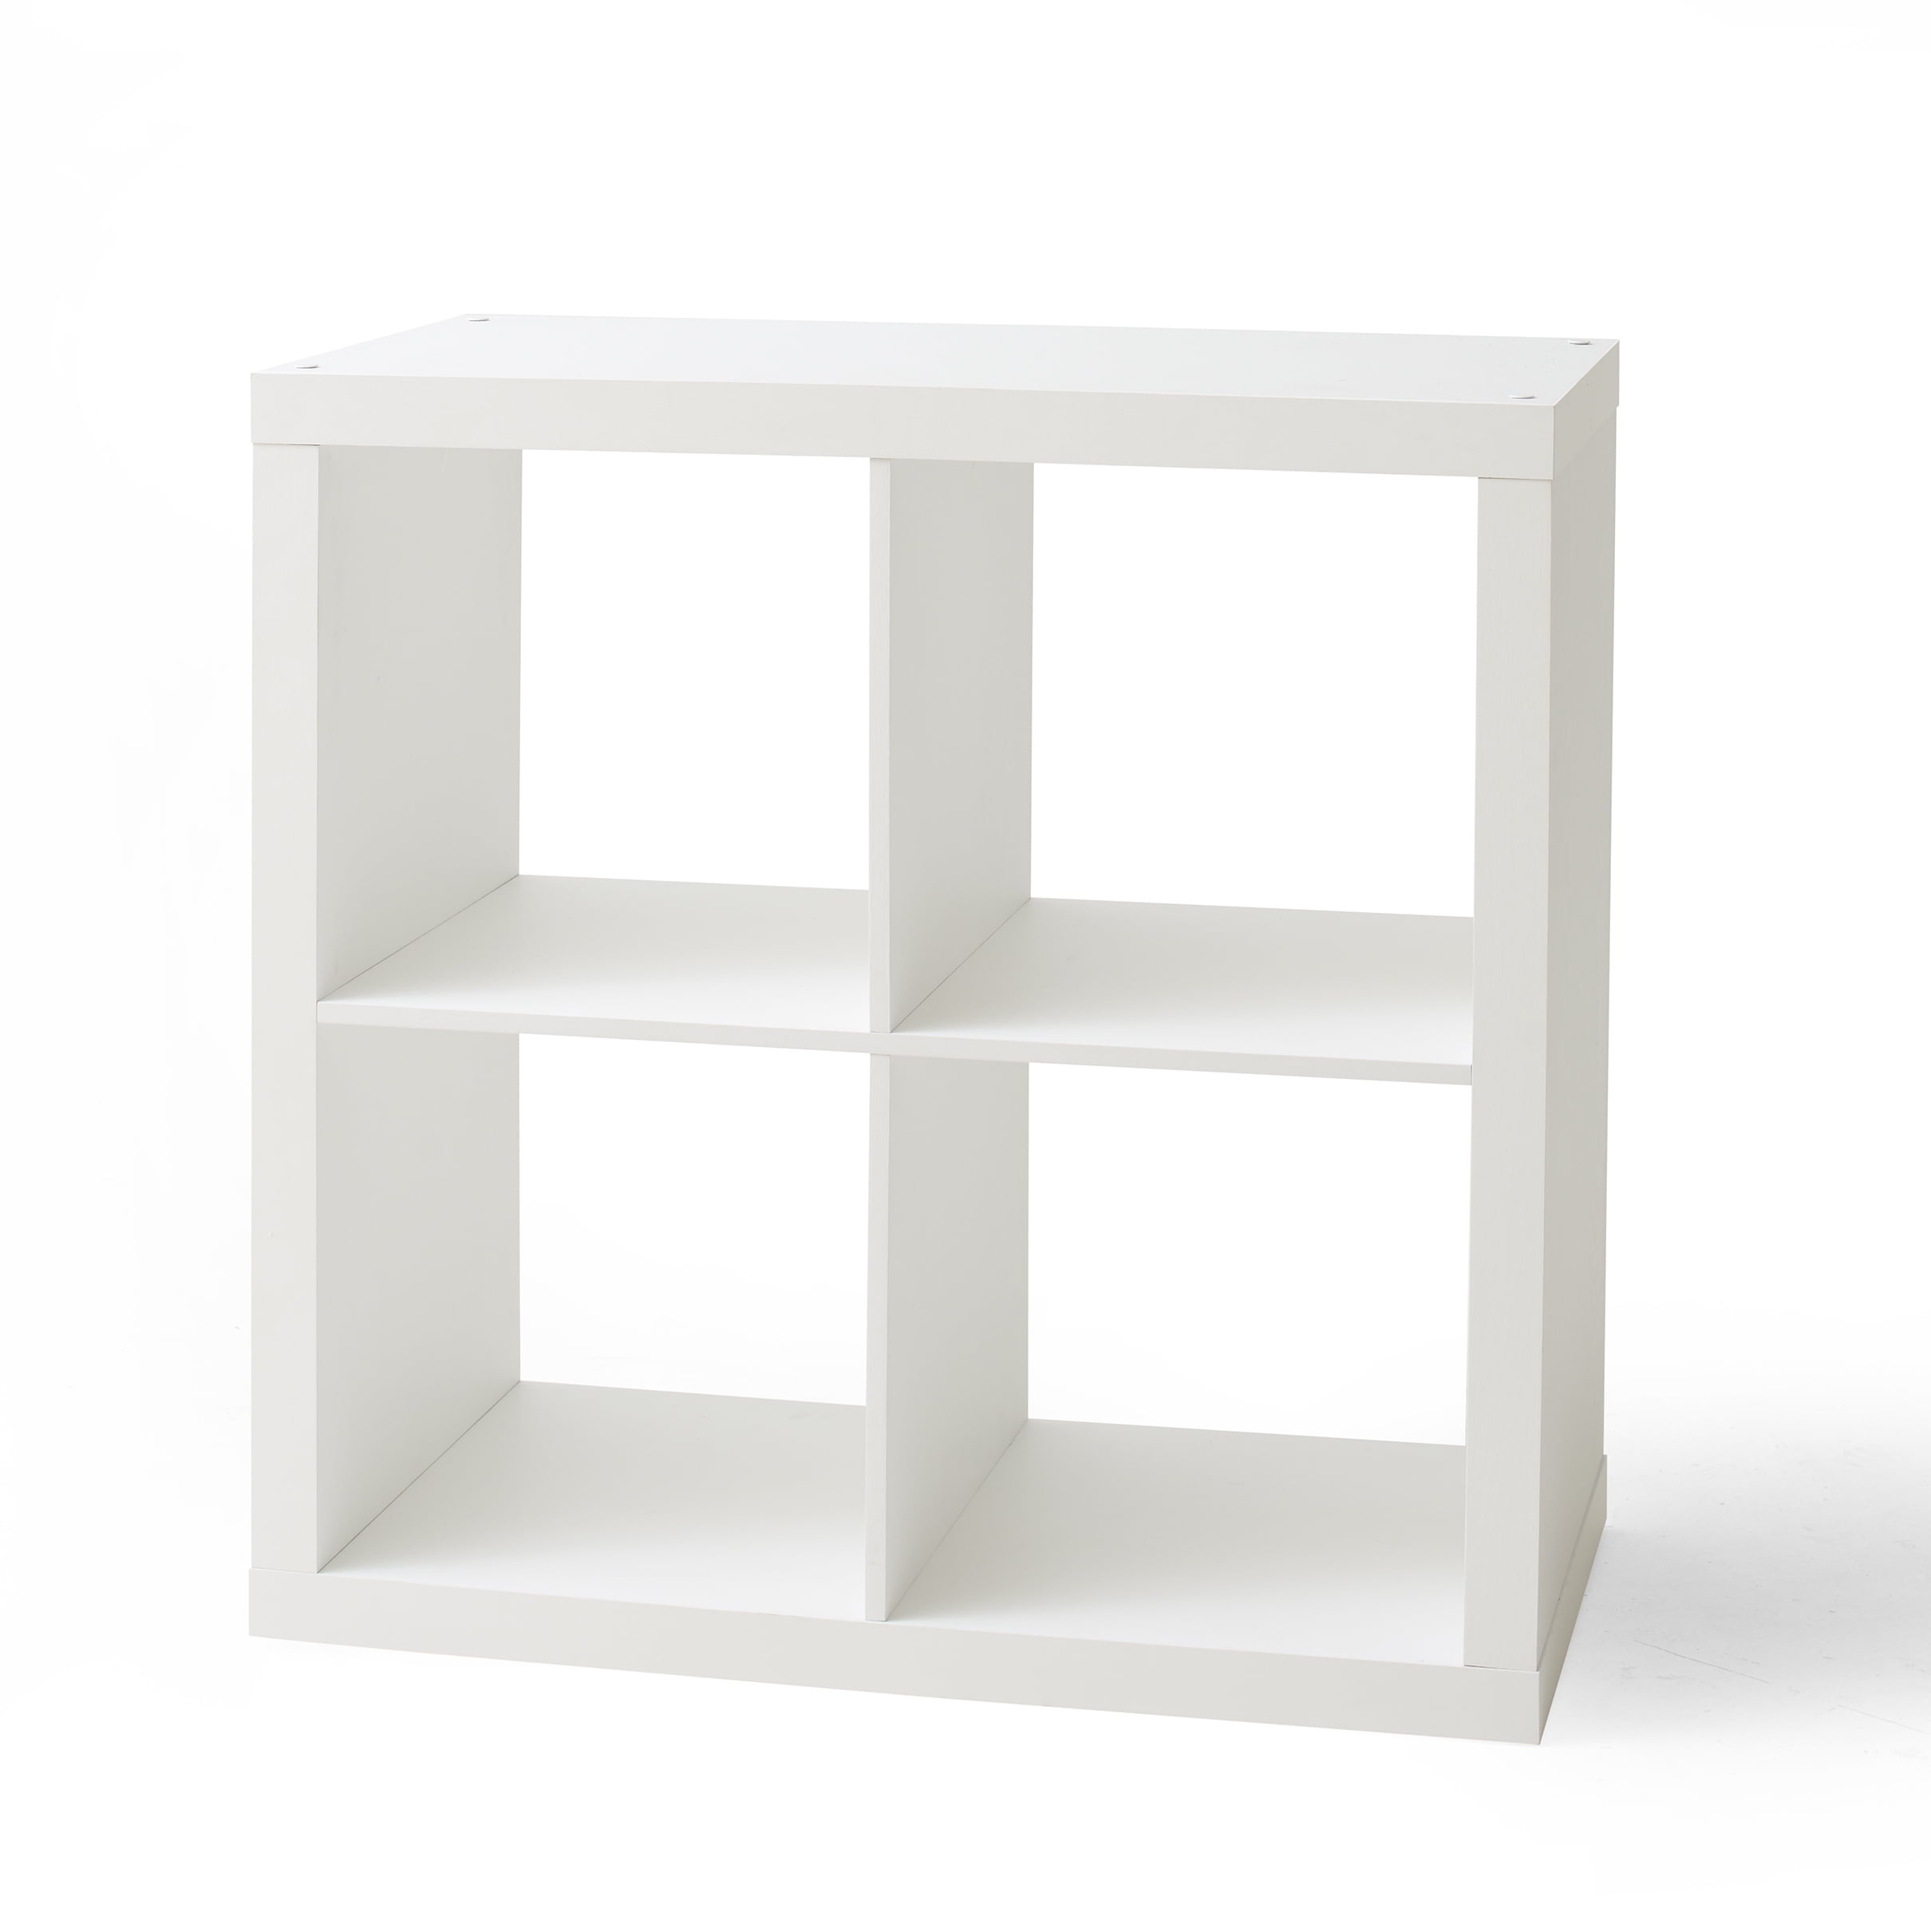 Weathered Bookshelf Square Storage Cabinet 4-Cube Organizer White, 4-Cube Better Homes and Gardens. White, 2-Cube